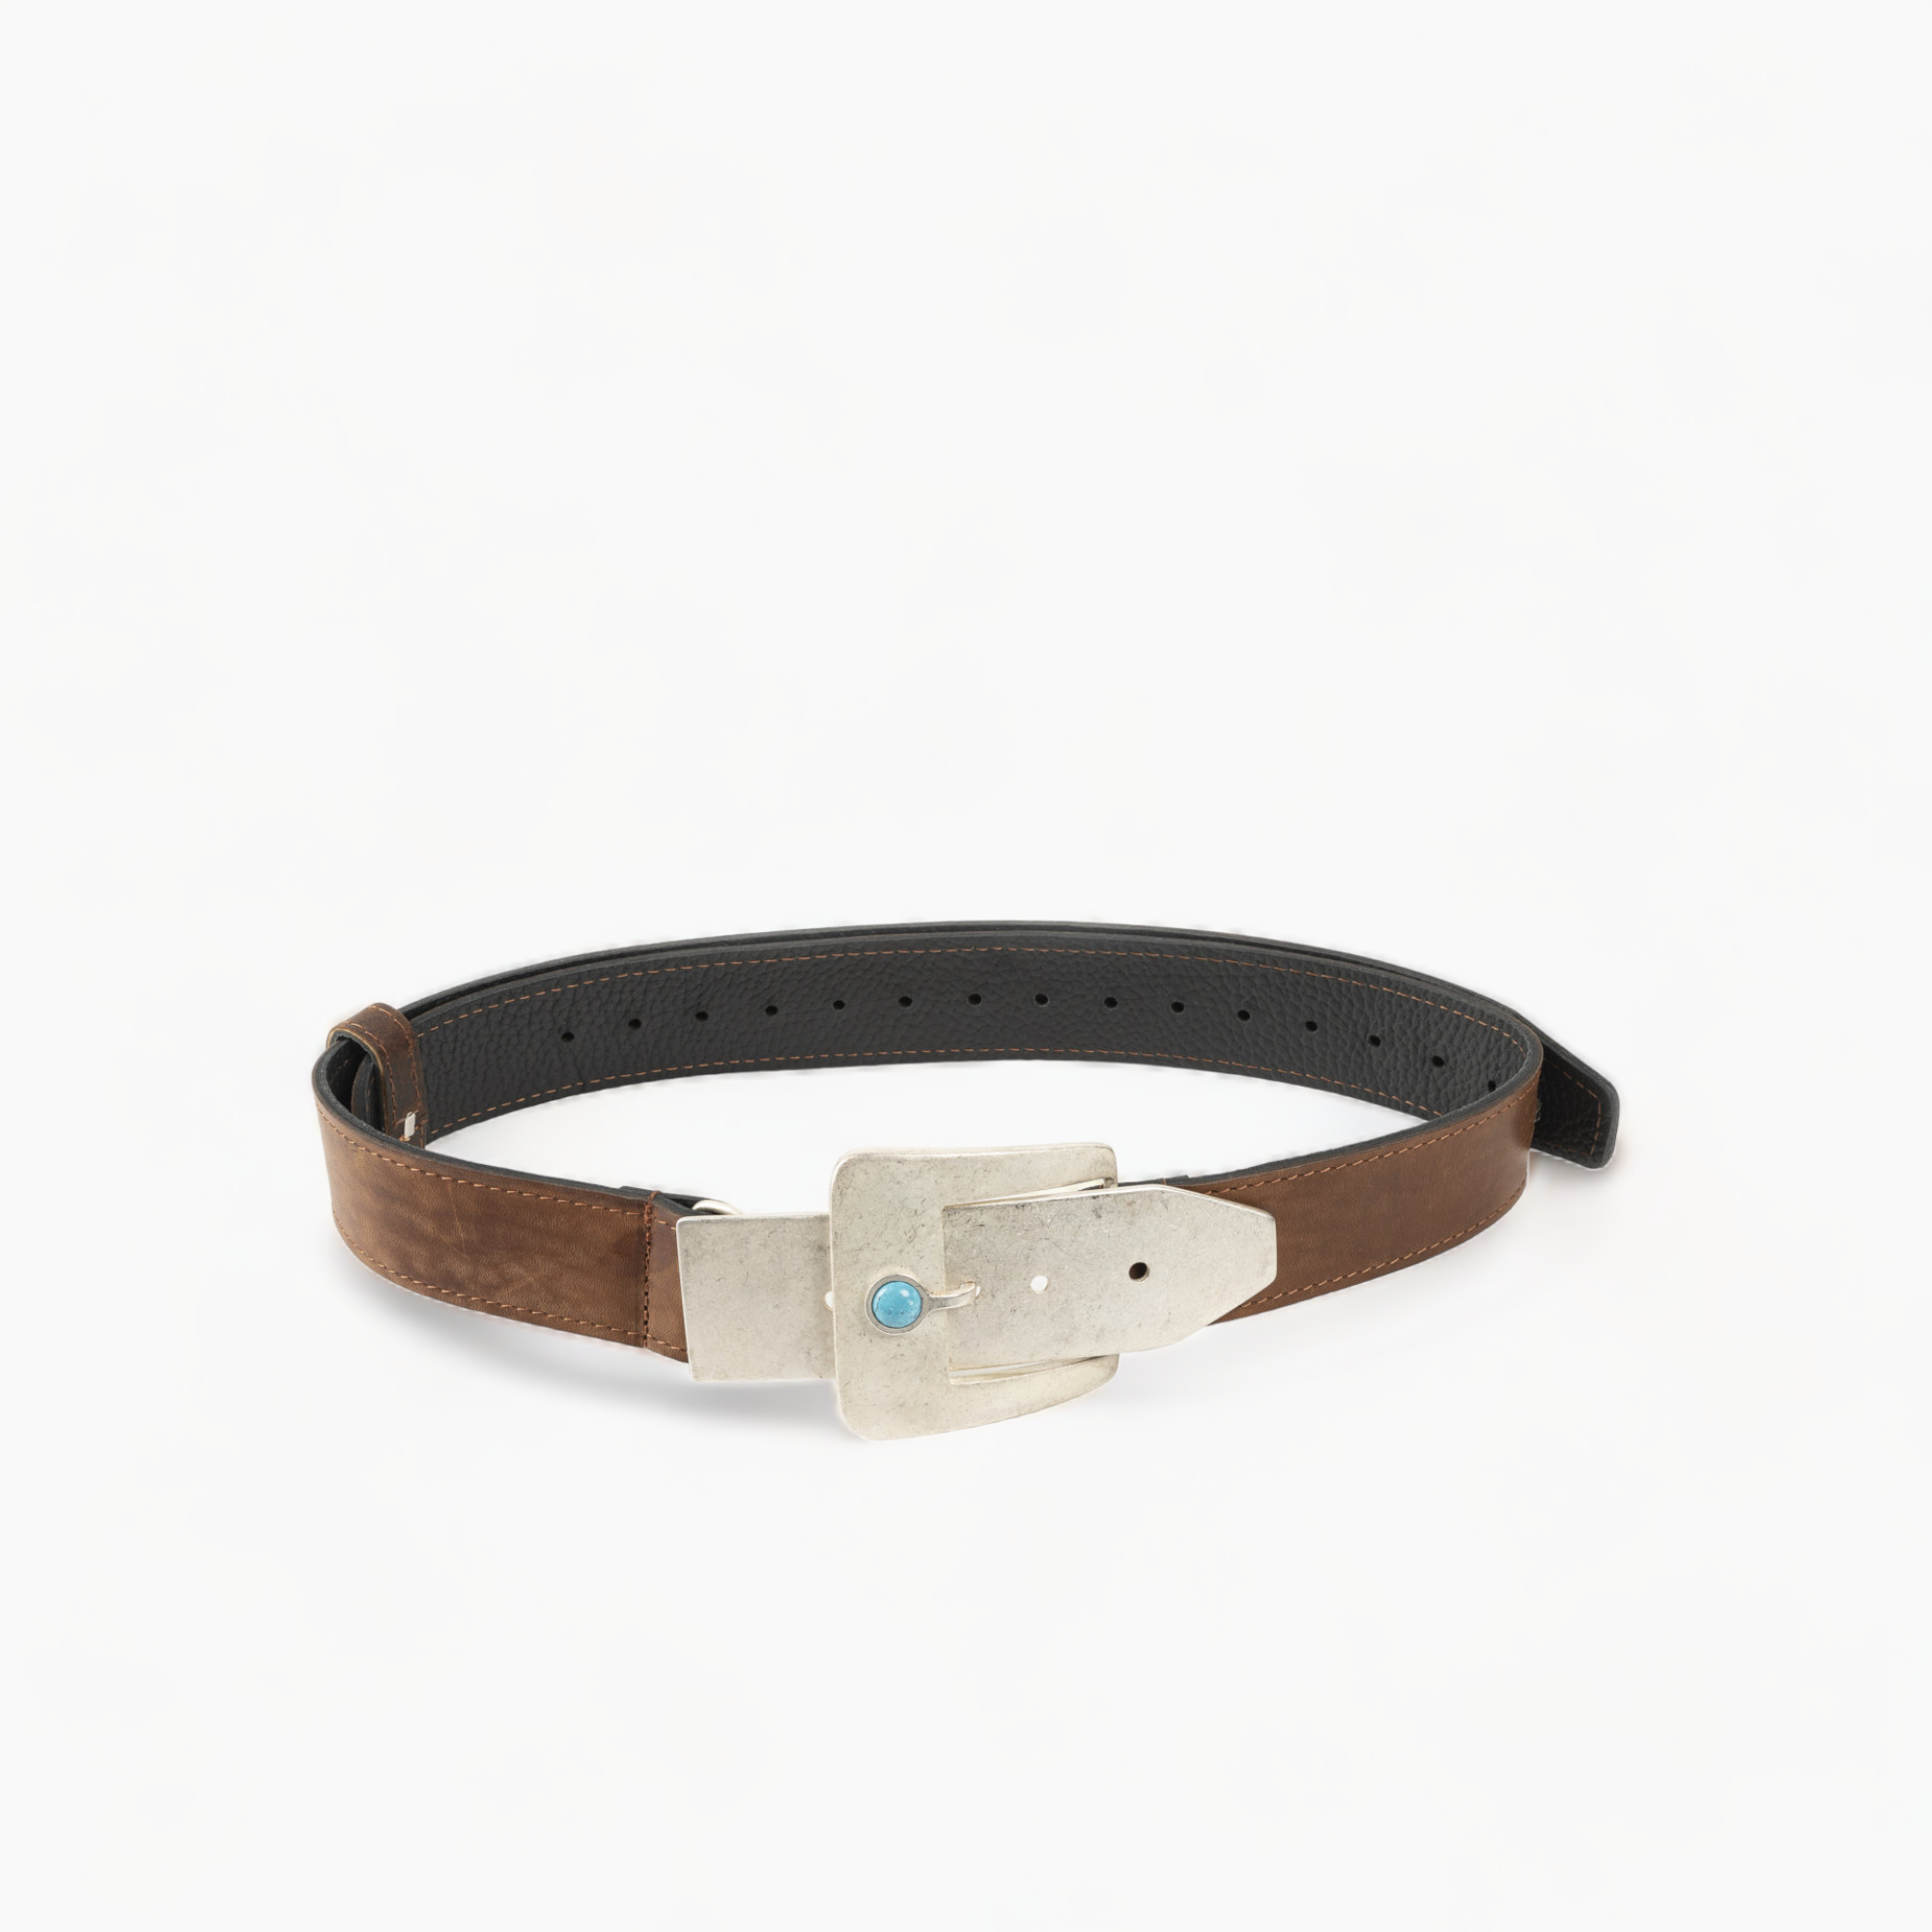 Leather belt with a buckle in brown color